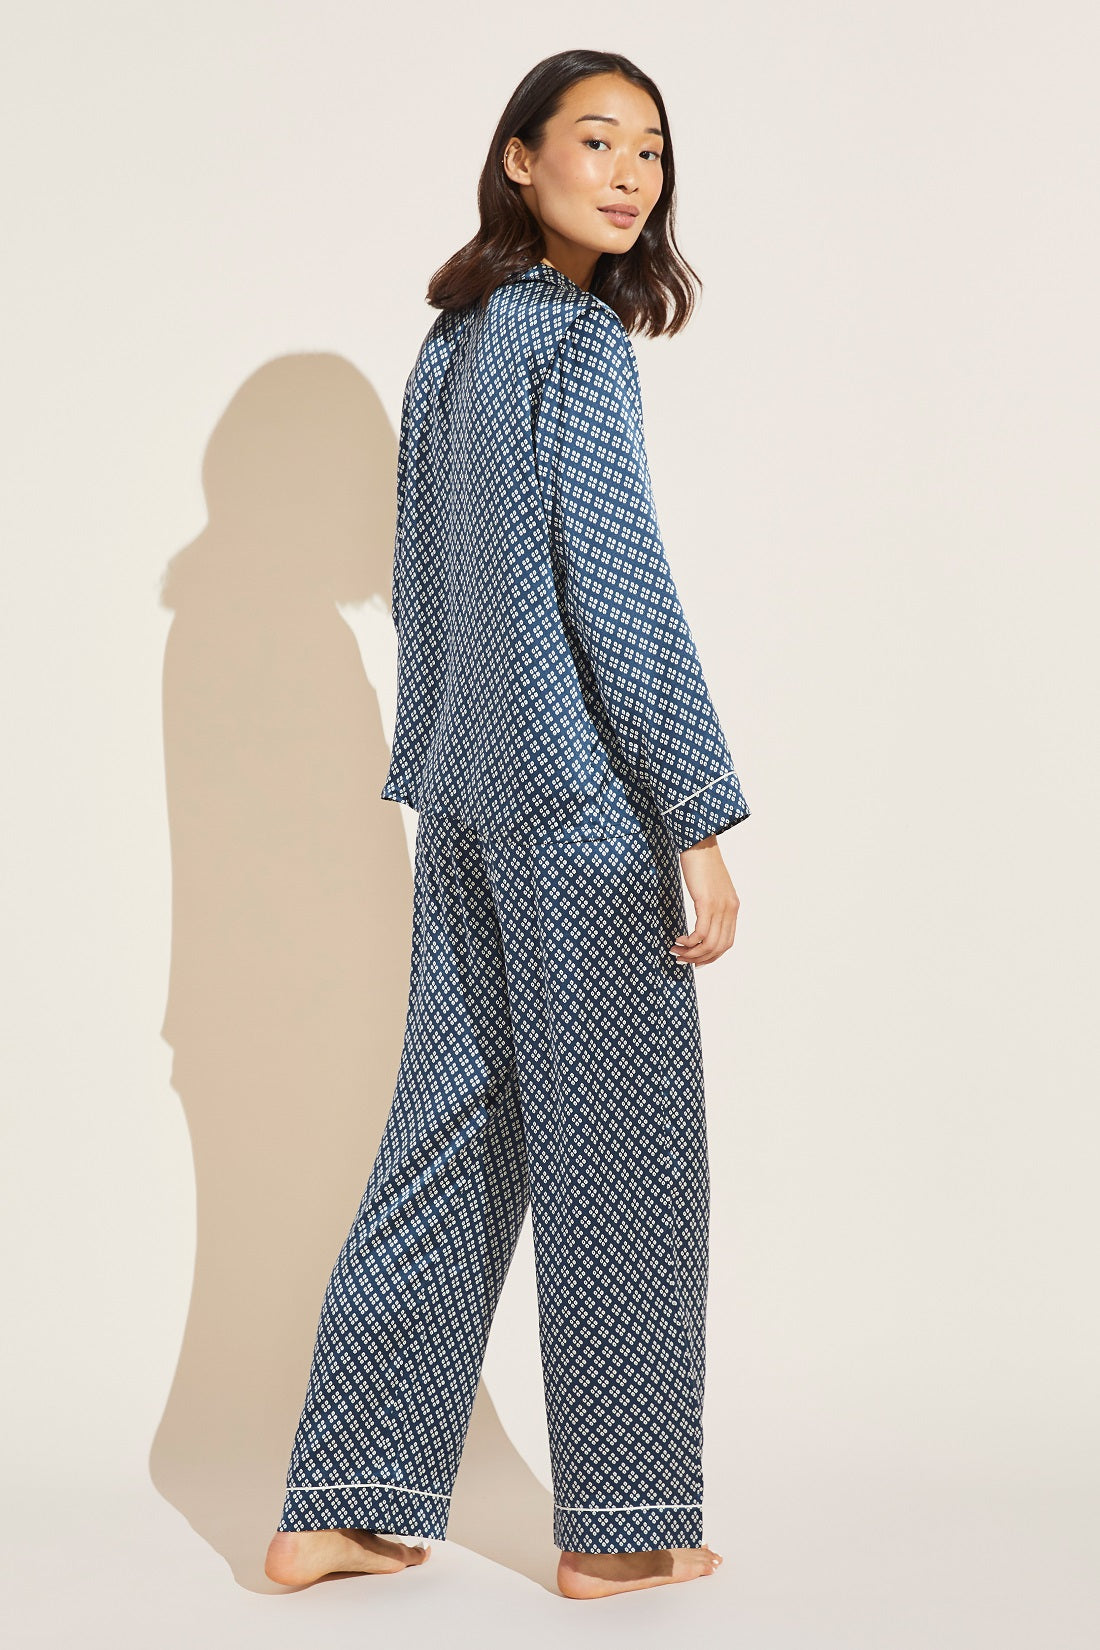 Eberjey Just Launched Washable Silk PJs to Make Your Lounging More Luxurious